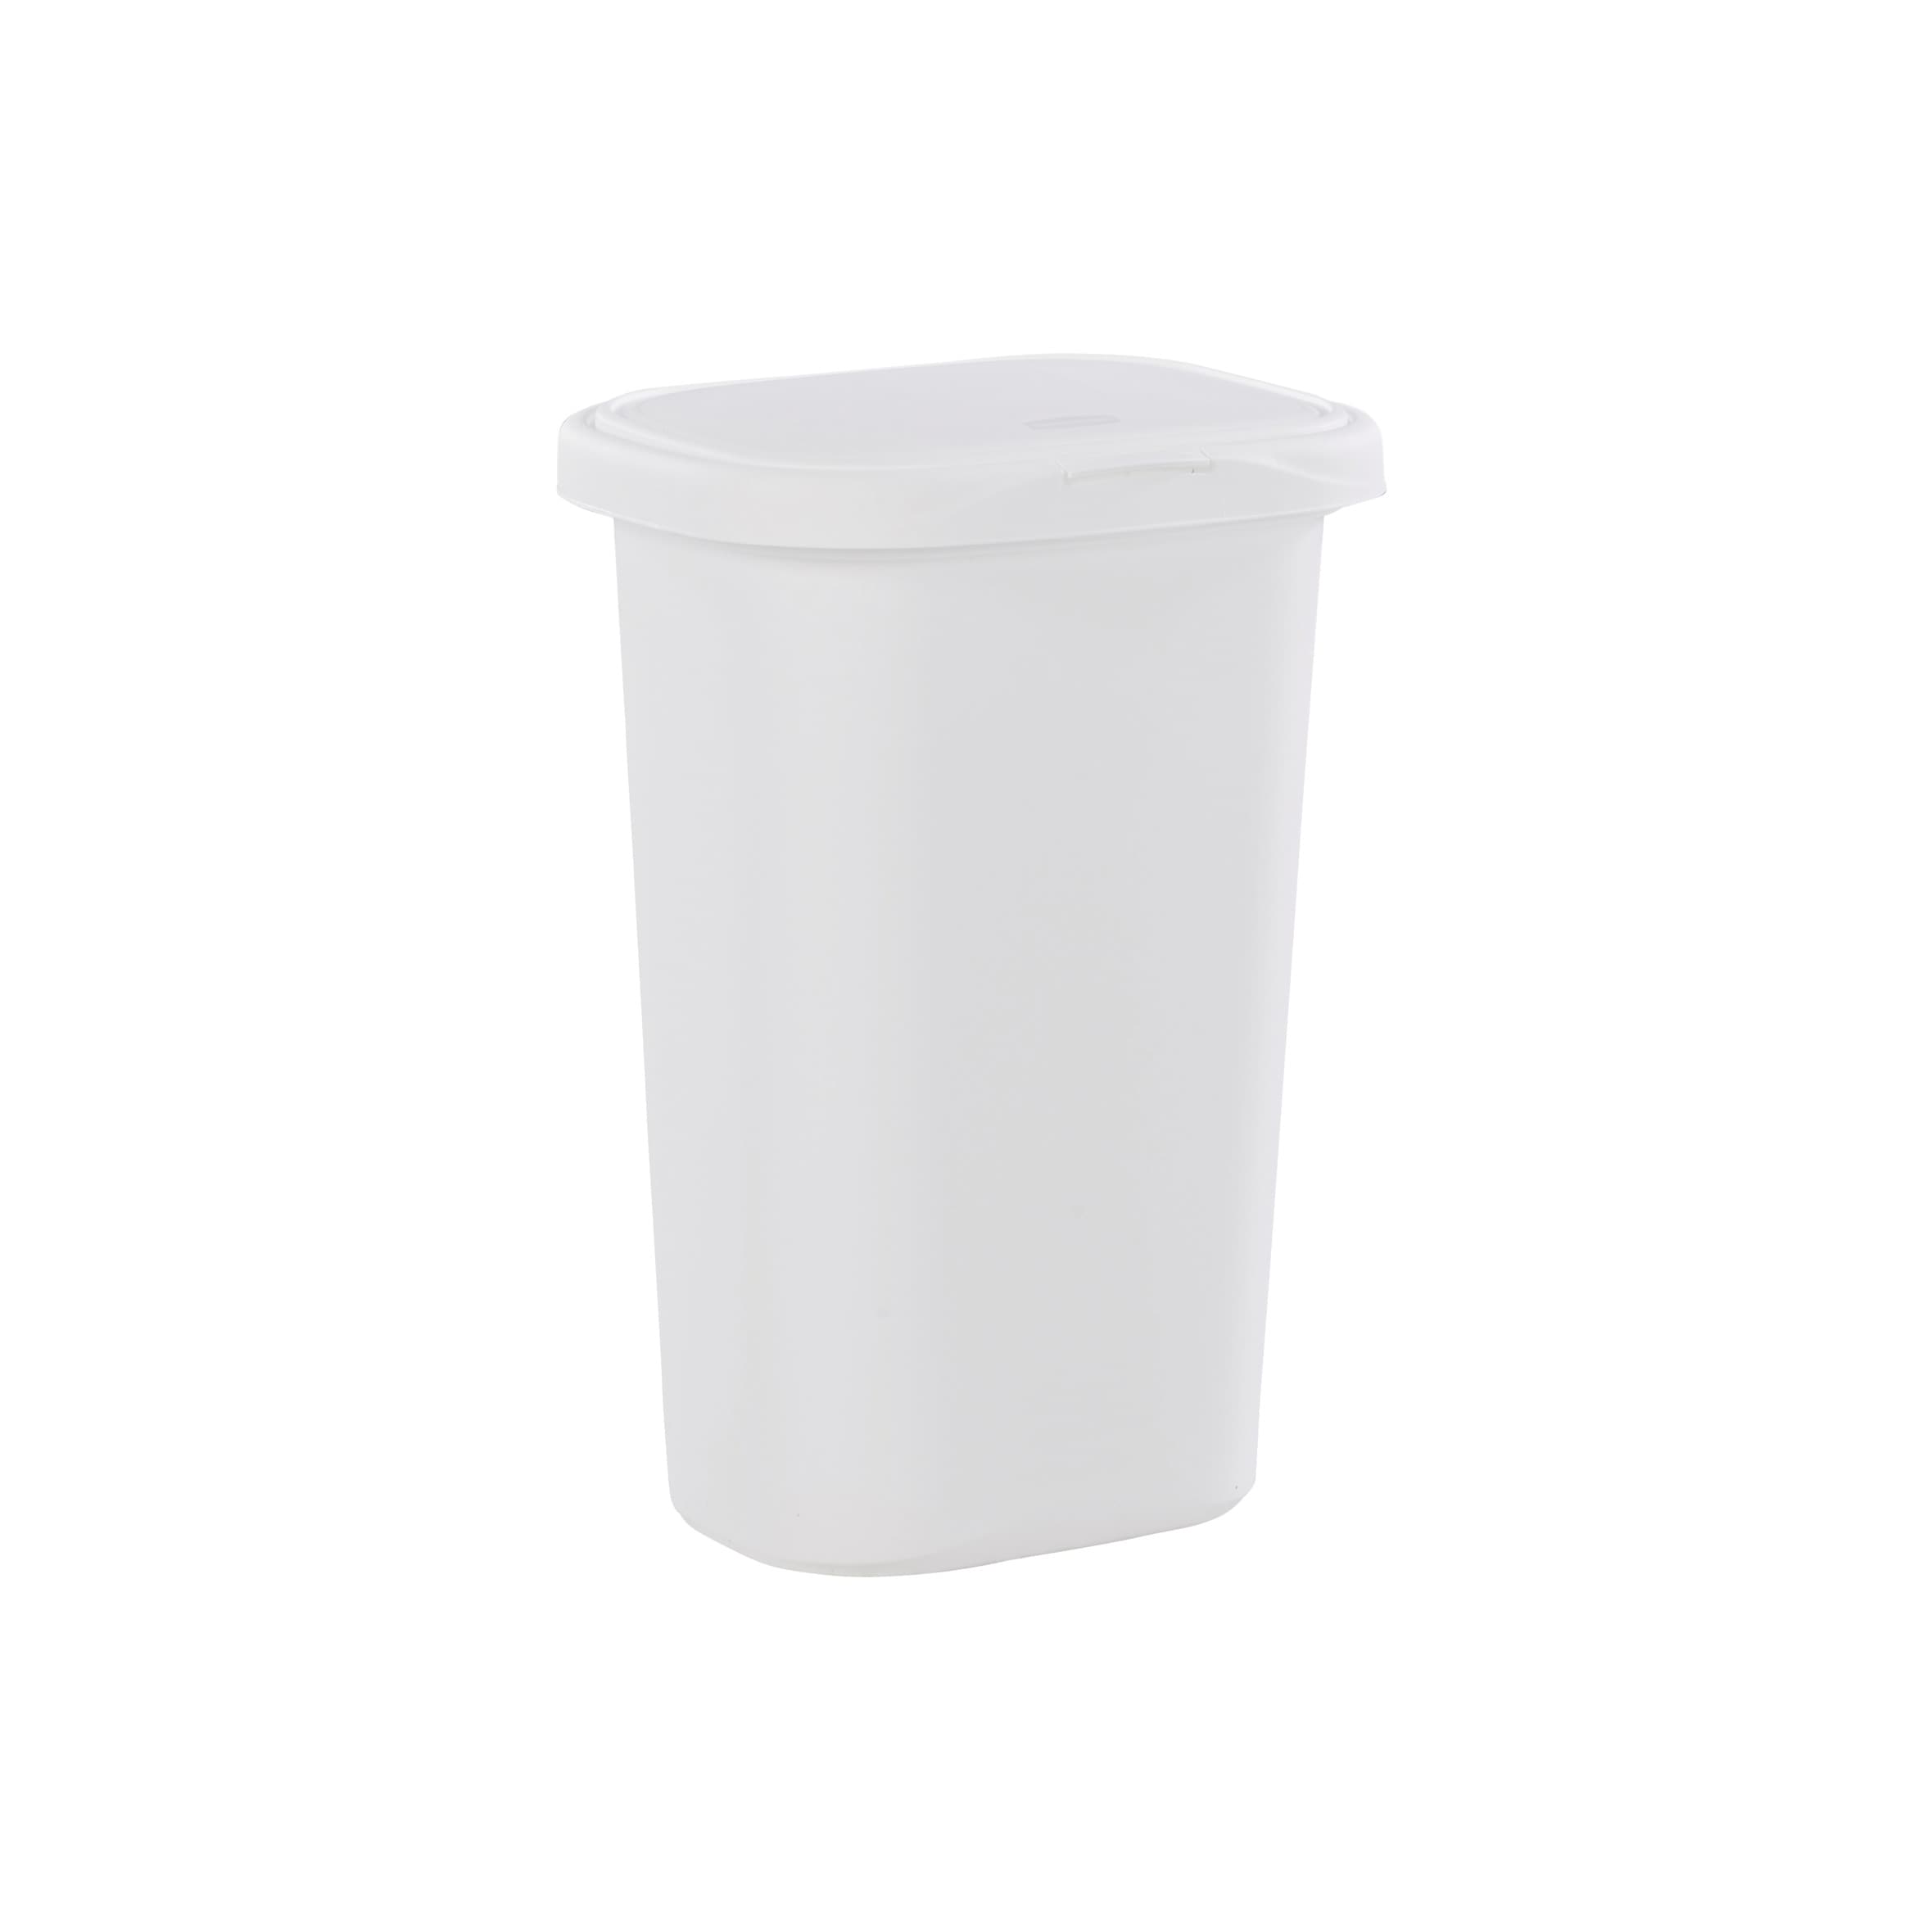 Rubbermaid 13-Gallons White Plastic Kitchen Trash Can with Lid